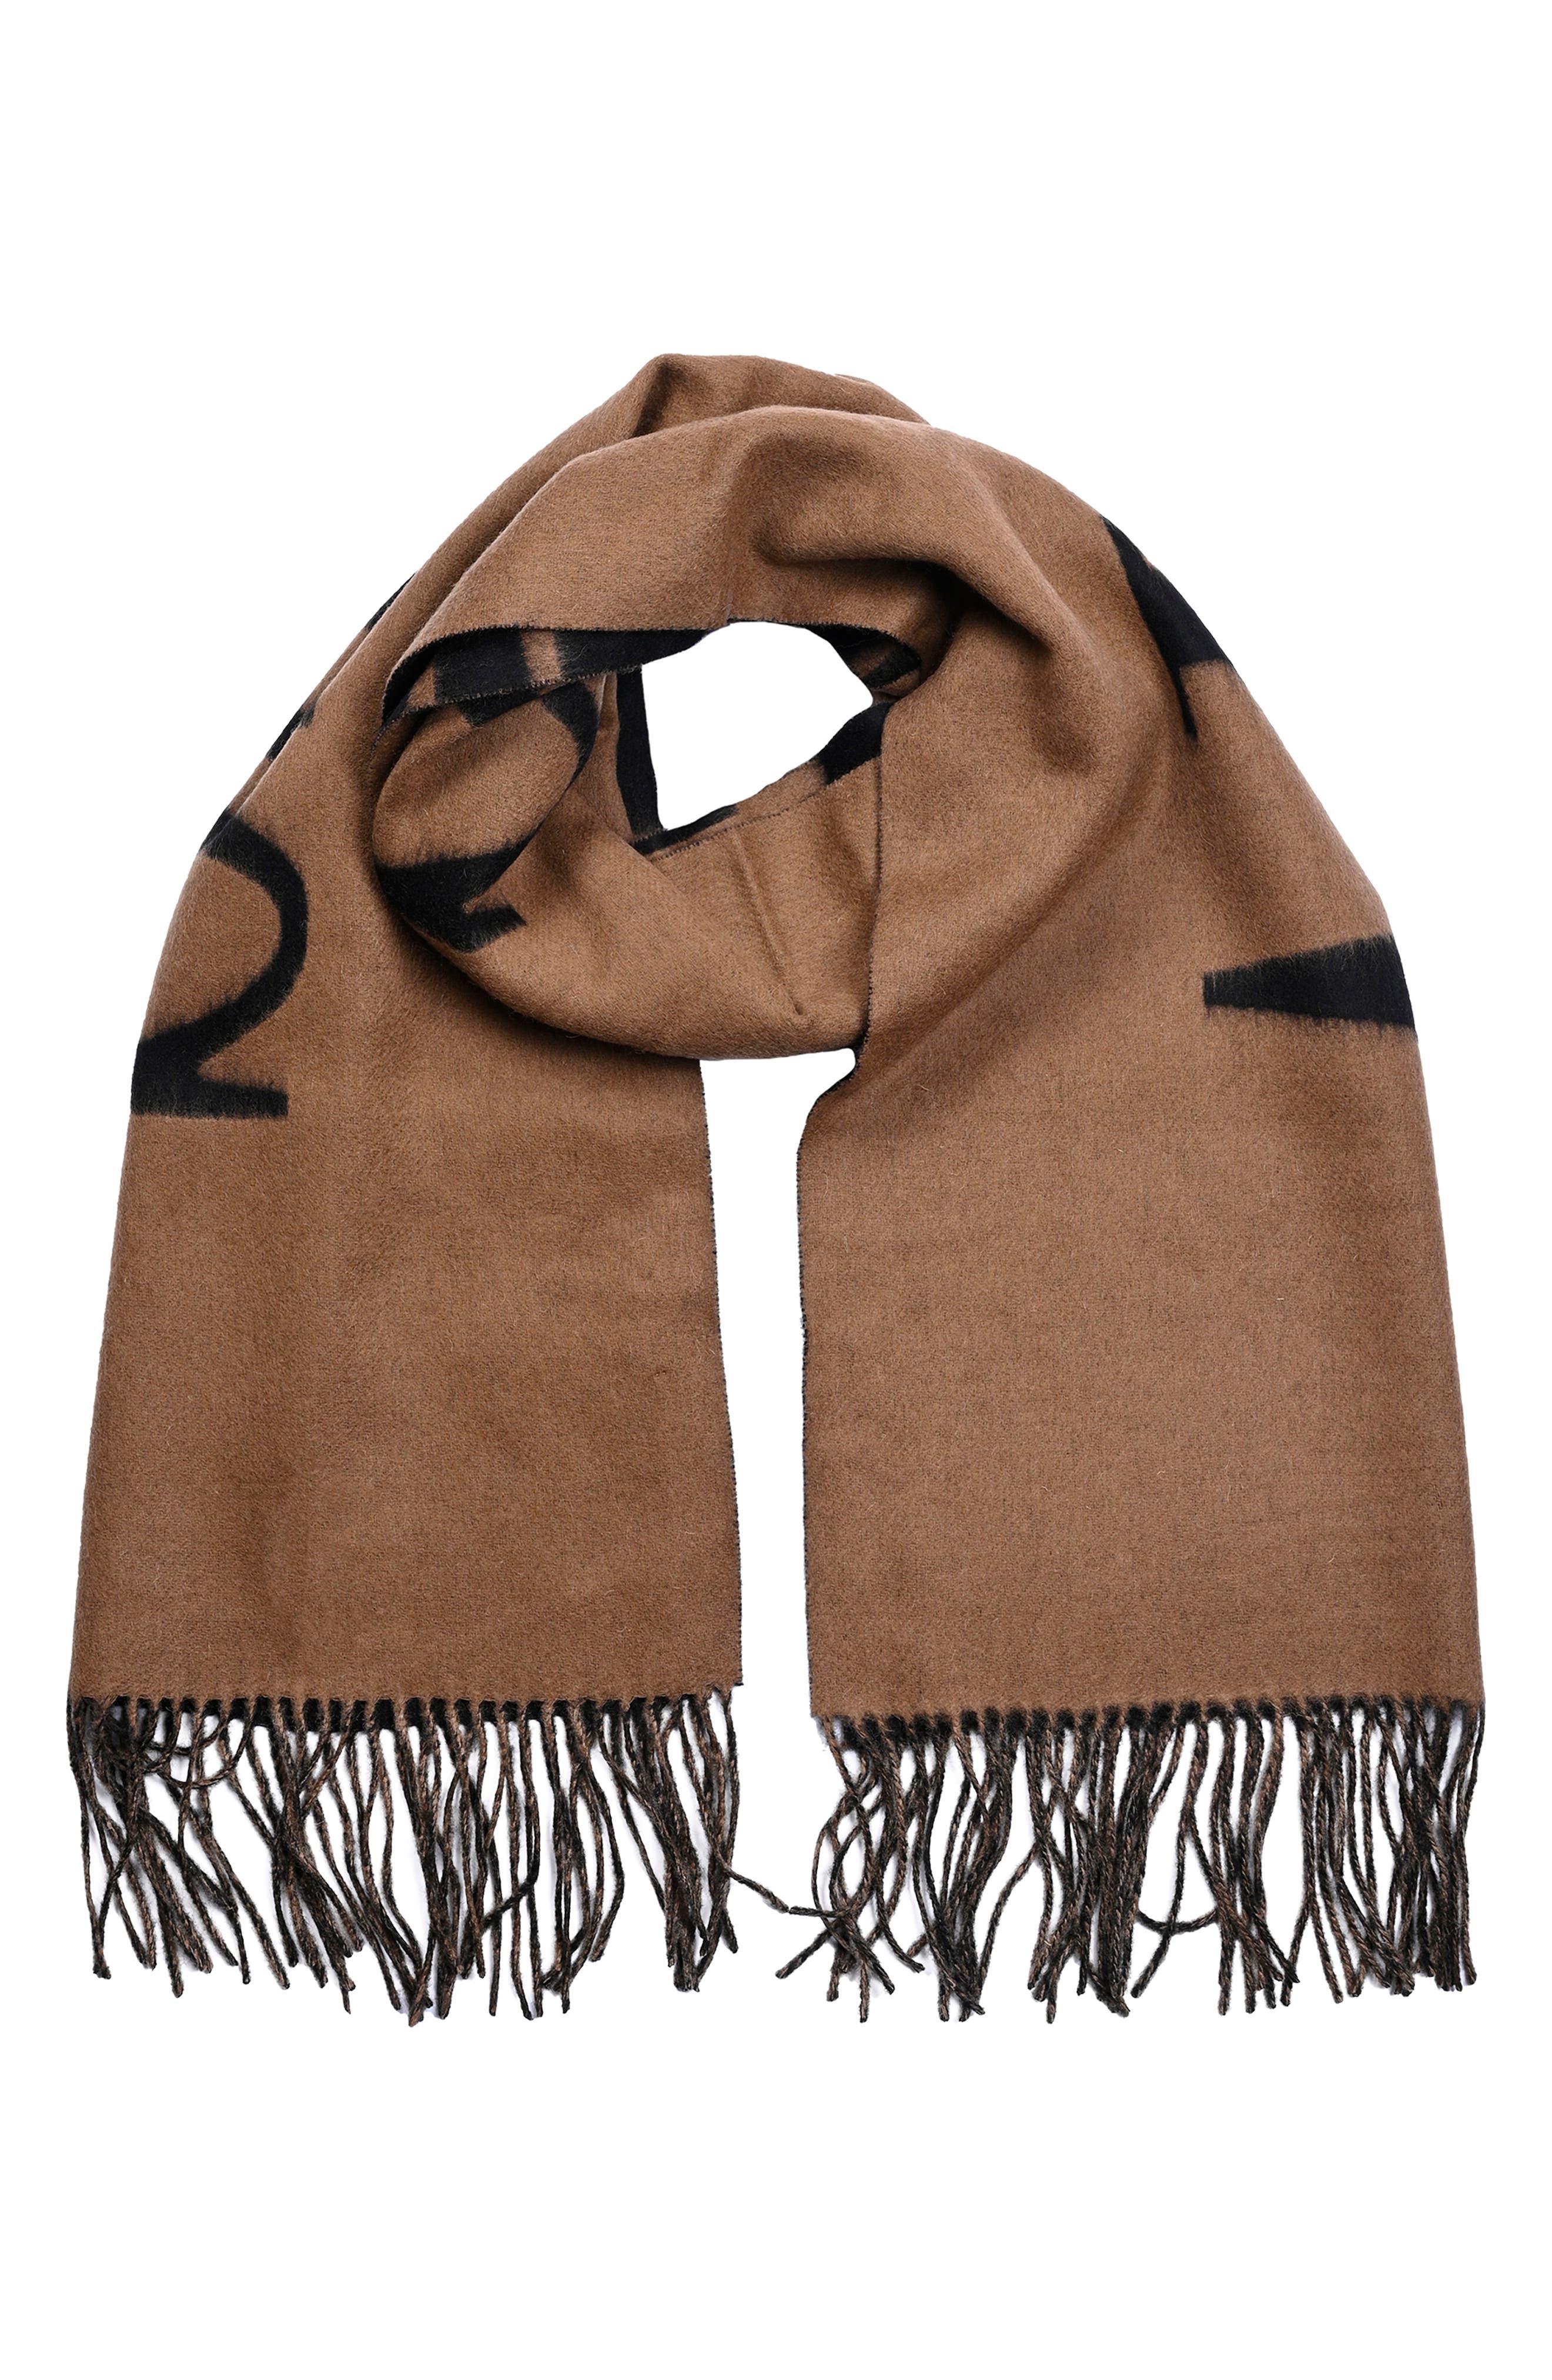 FREE DELIVERY %100 Wool Scarf Warm Wrap Soft Wool  Shawl for Women and Men 